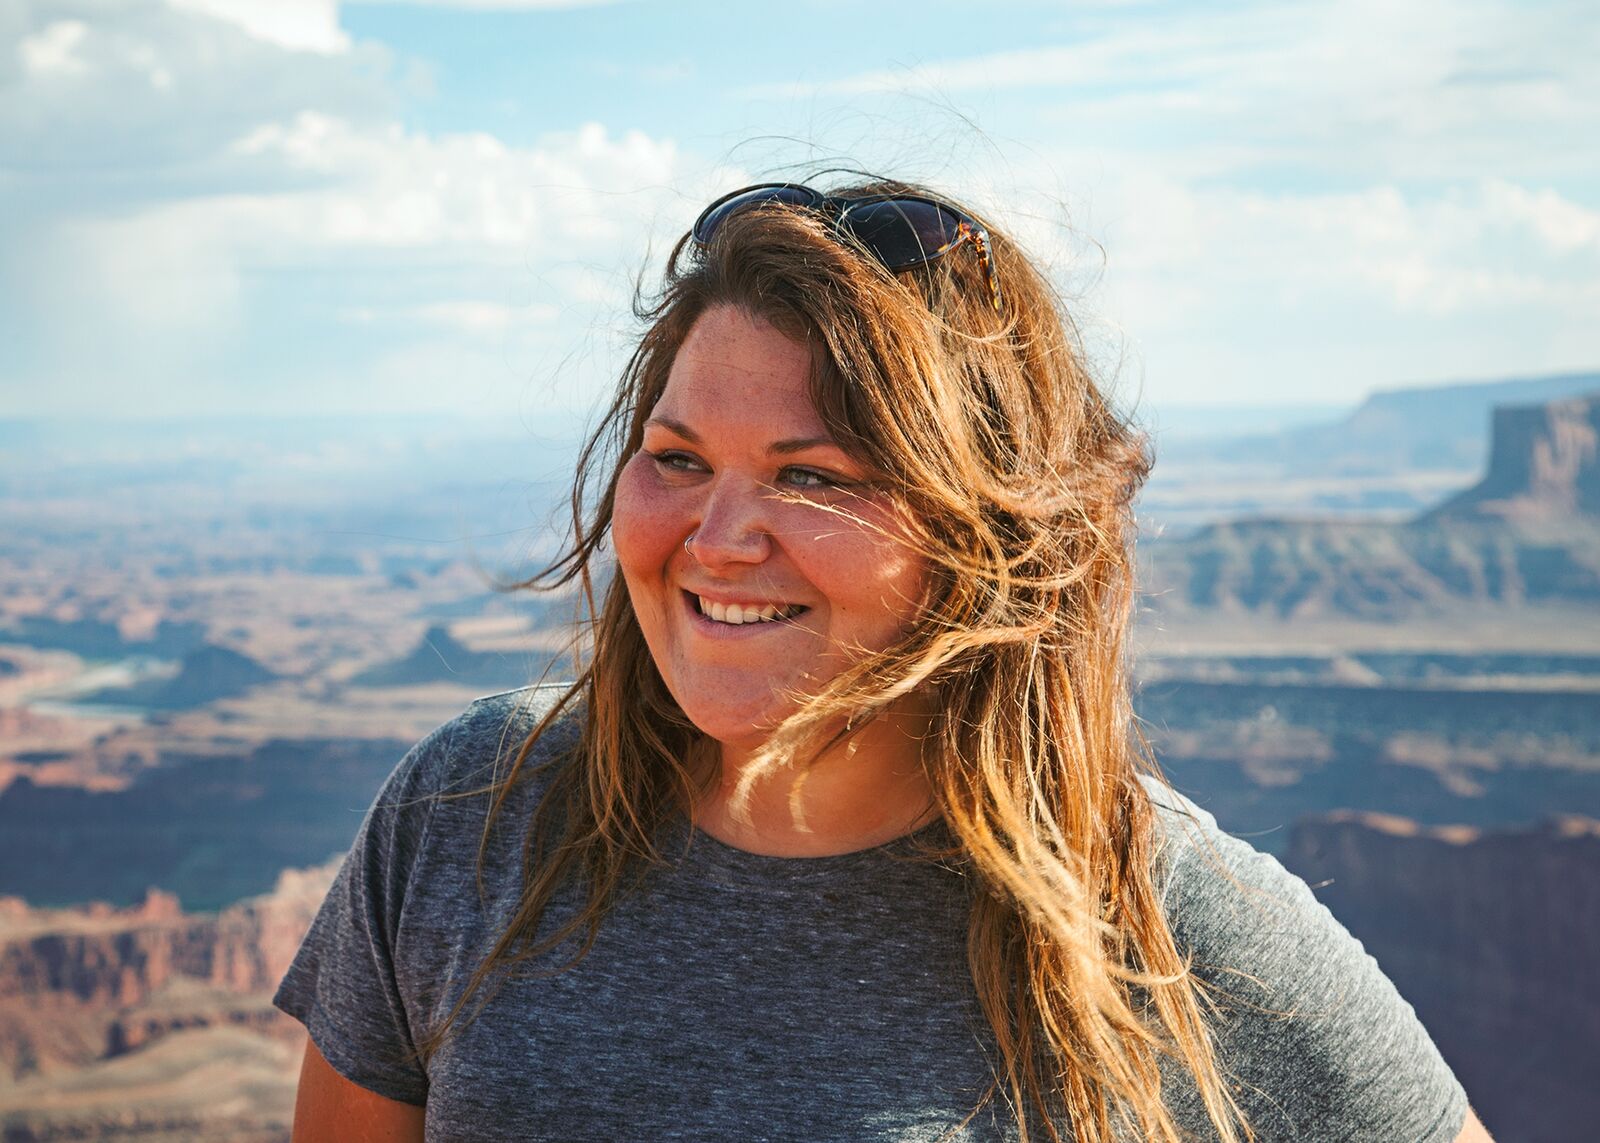 Chelsey smiling at the rim of Dead Horse Point in Moab, Utah